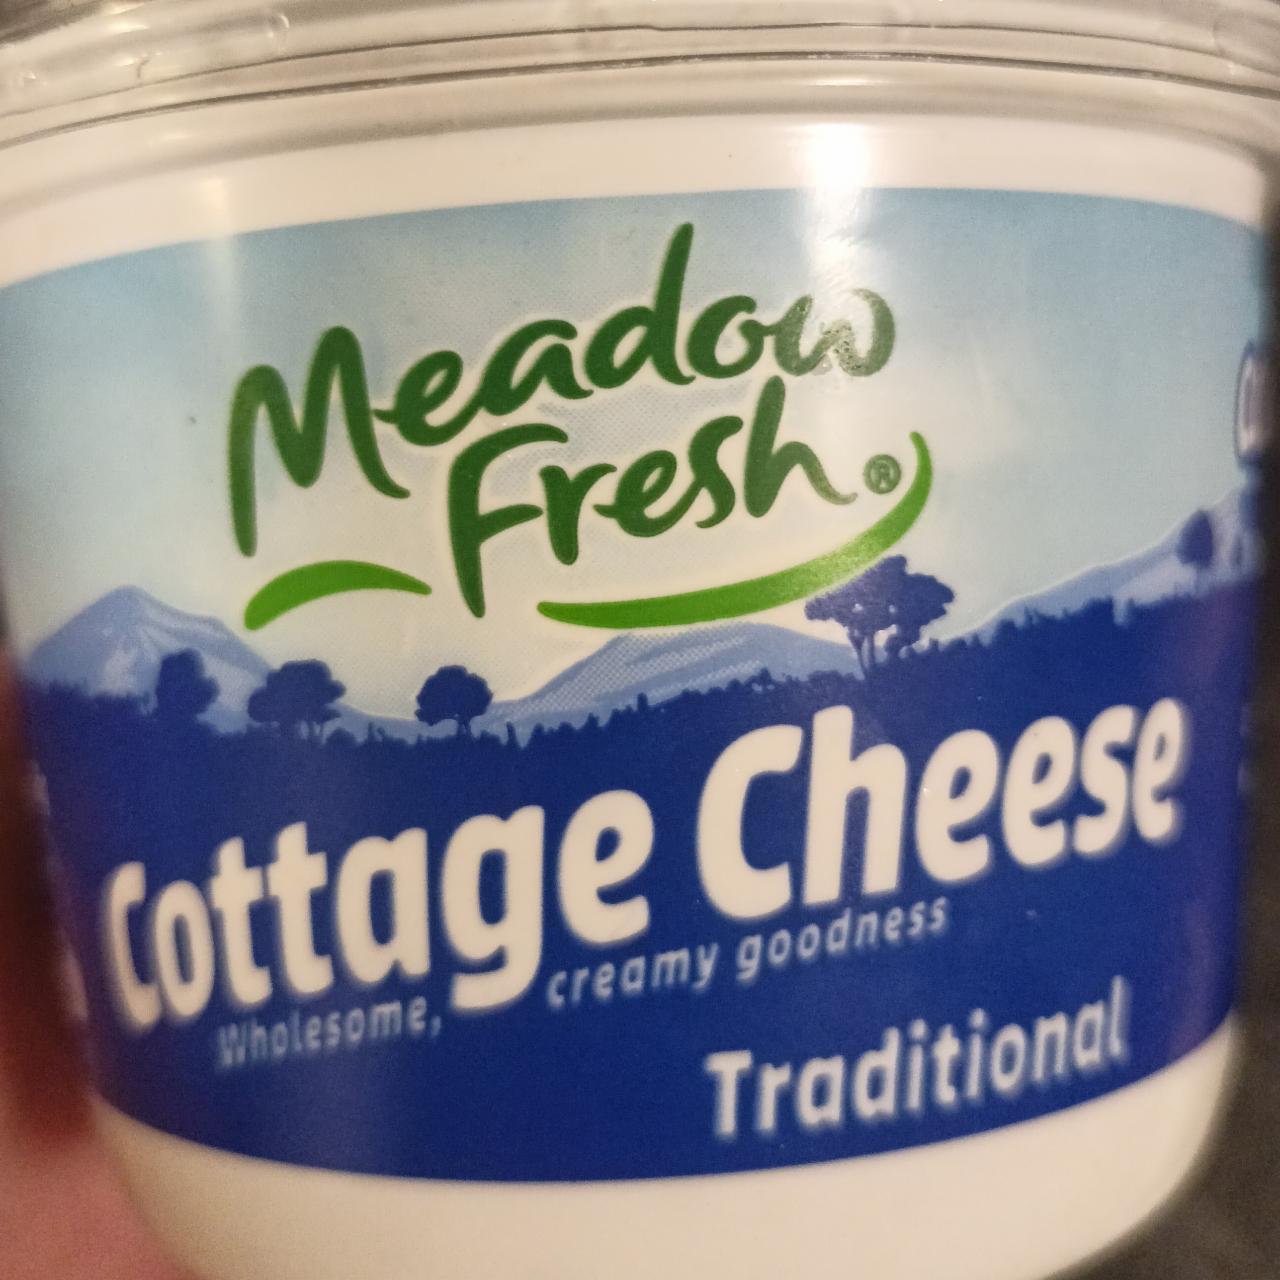 Fotografie - Traditional Cottage Cheese Meadow Fresh